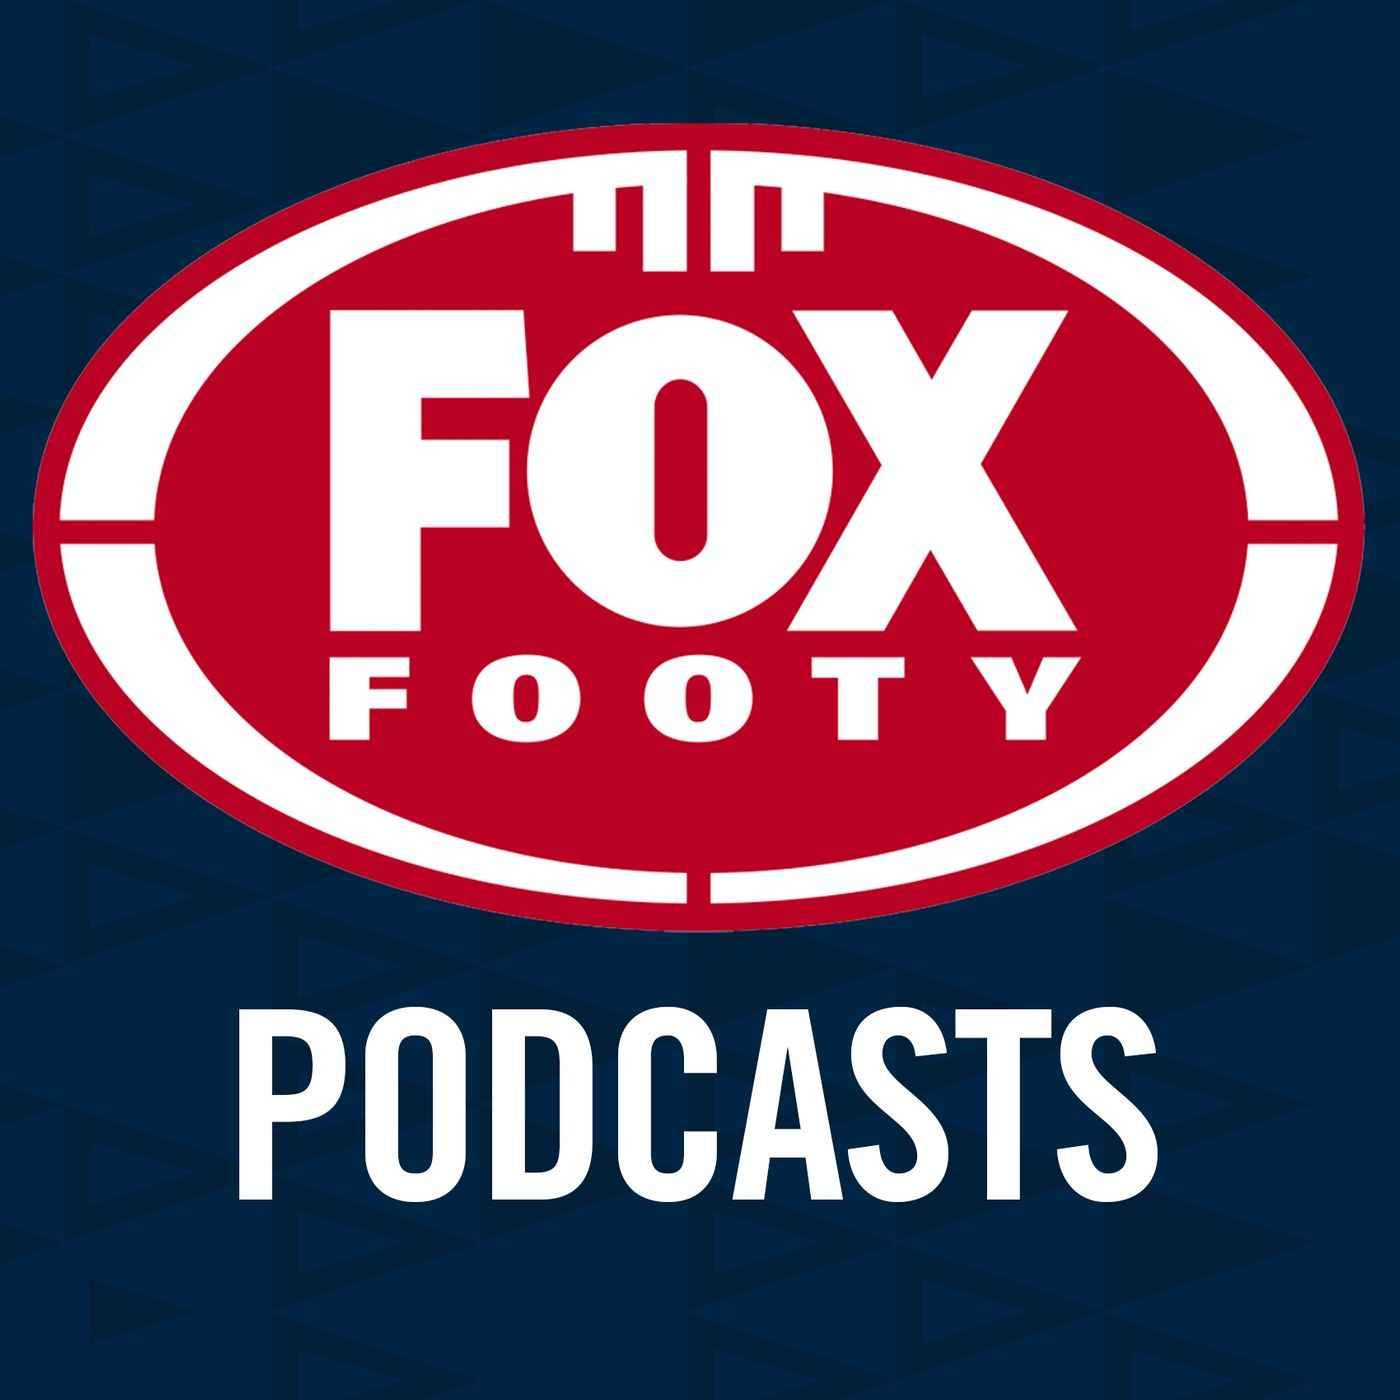 FOX FOOTY Podcast: Round 4 Review